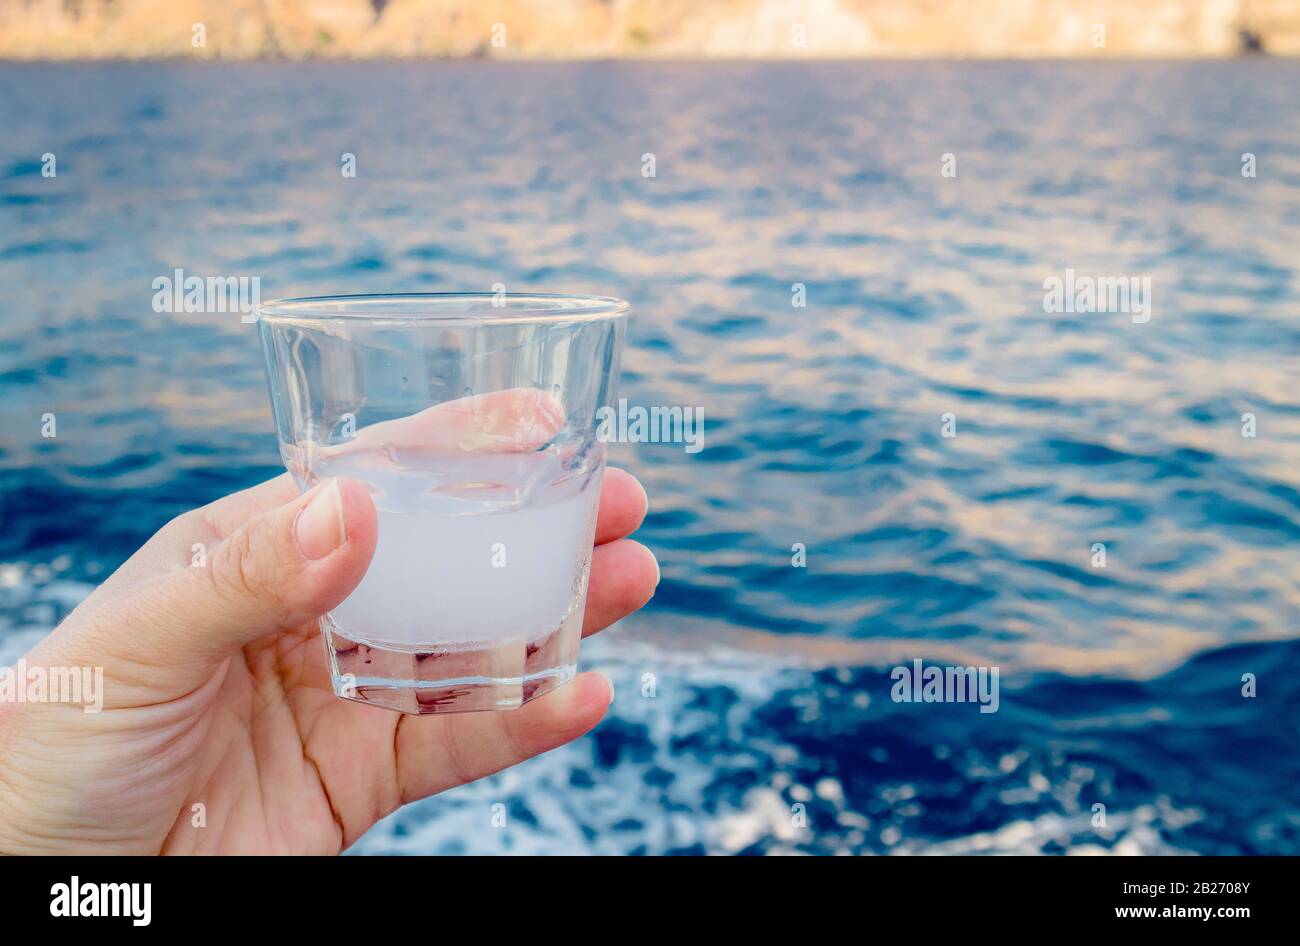 Person tourist hand holding shot glass of Ouzo witch is a dry anise-flavoured aperitif and tasting it outdoors in Santorini, Greece. Stock Photo